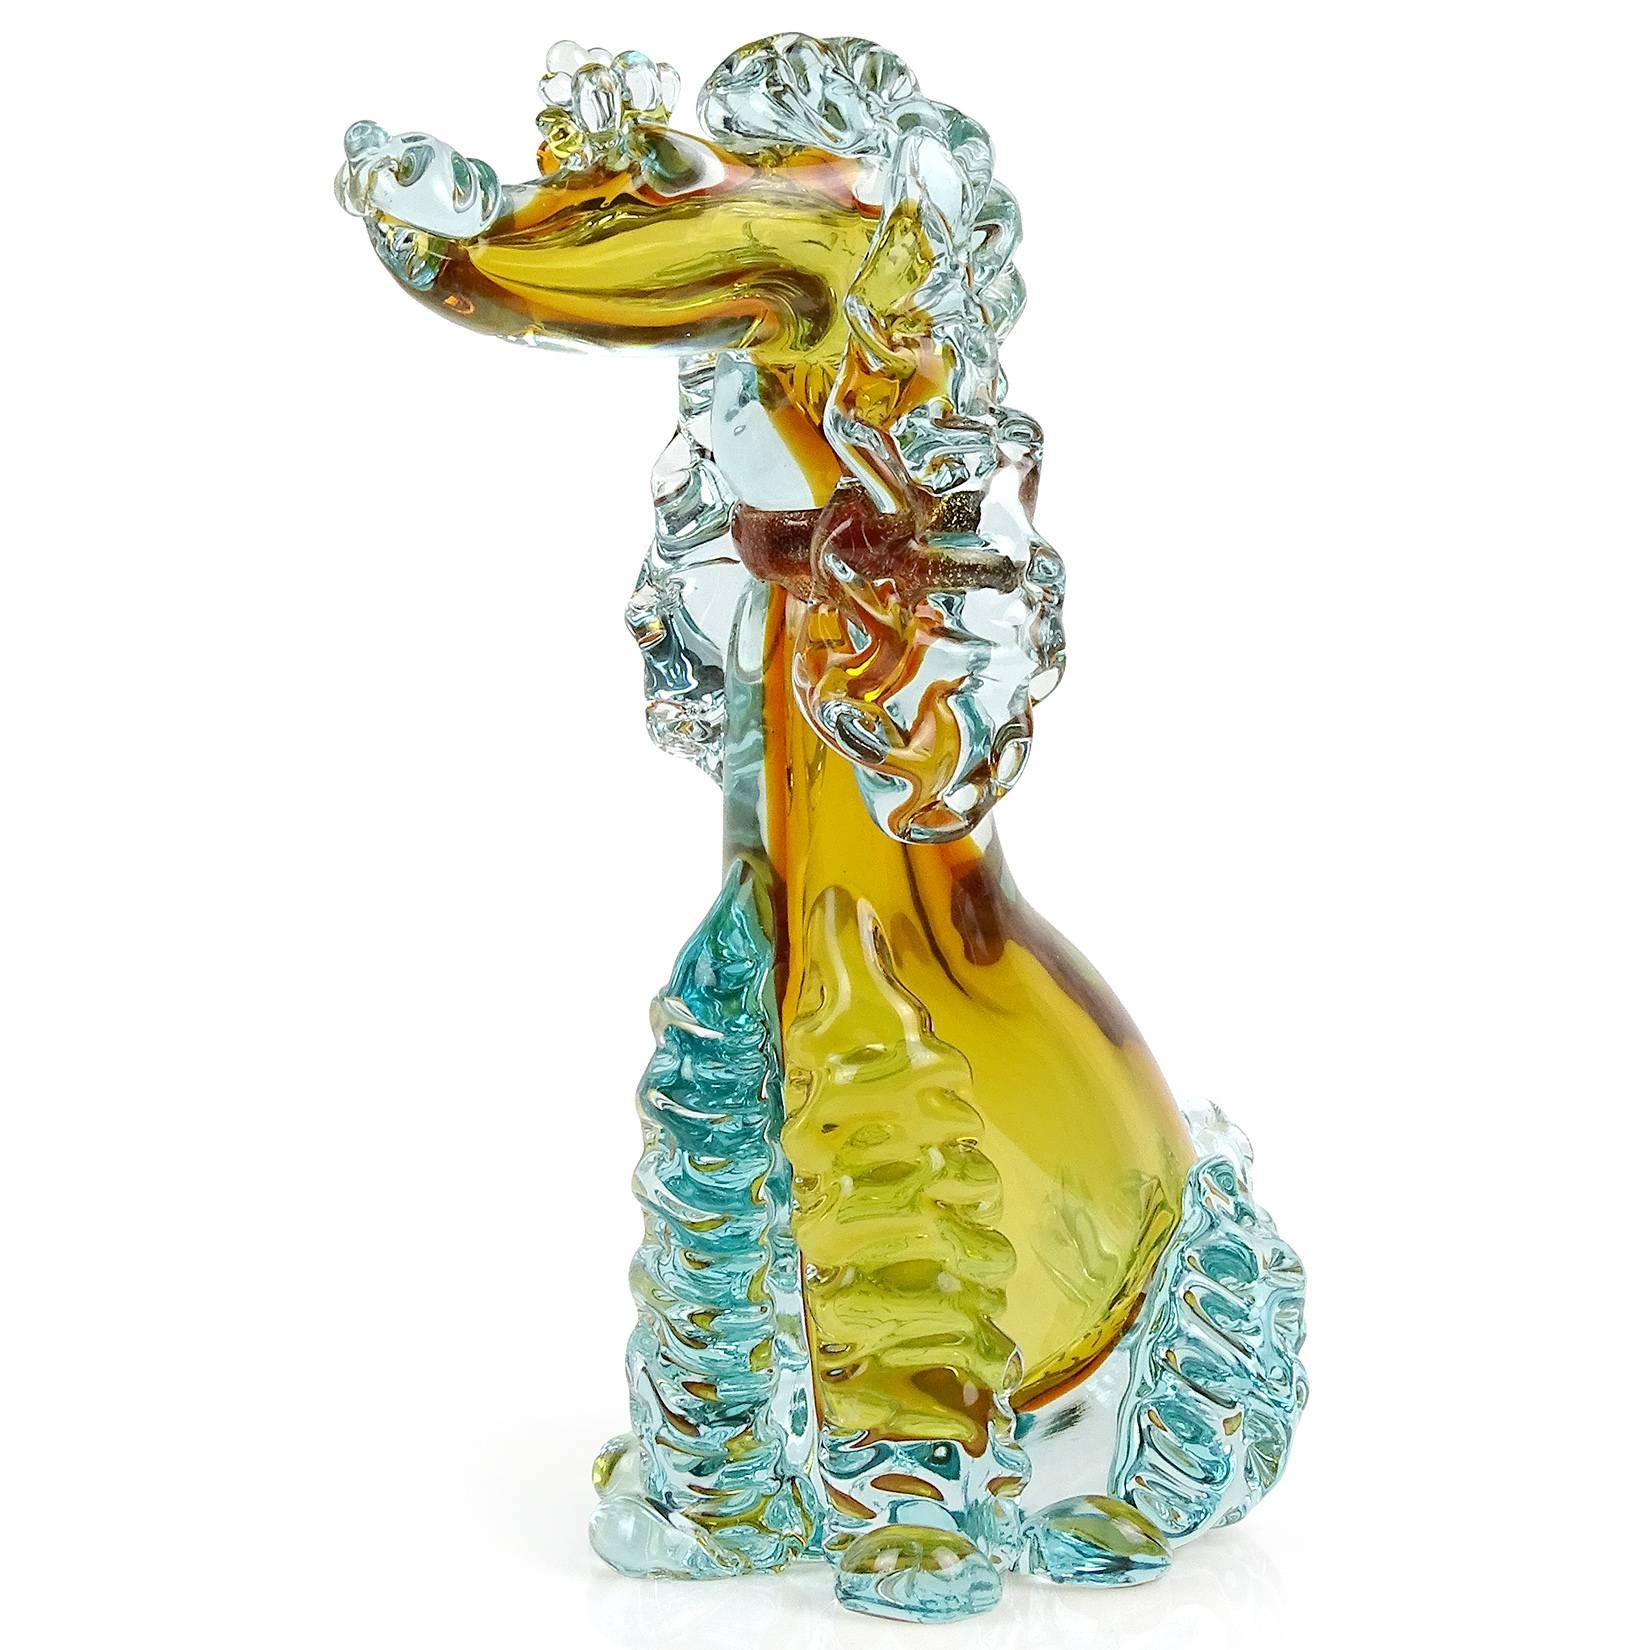 Hand-Crafted Alfredo Barbini Murano Sommerso Gold Italian Art Glass Poodle Dog Sculpture